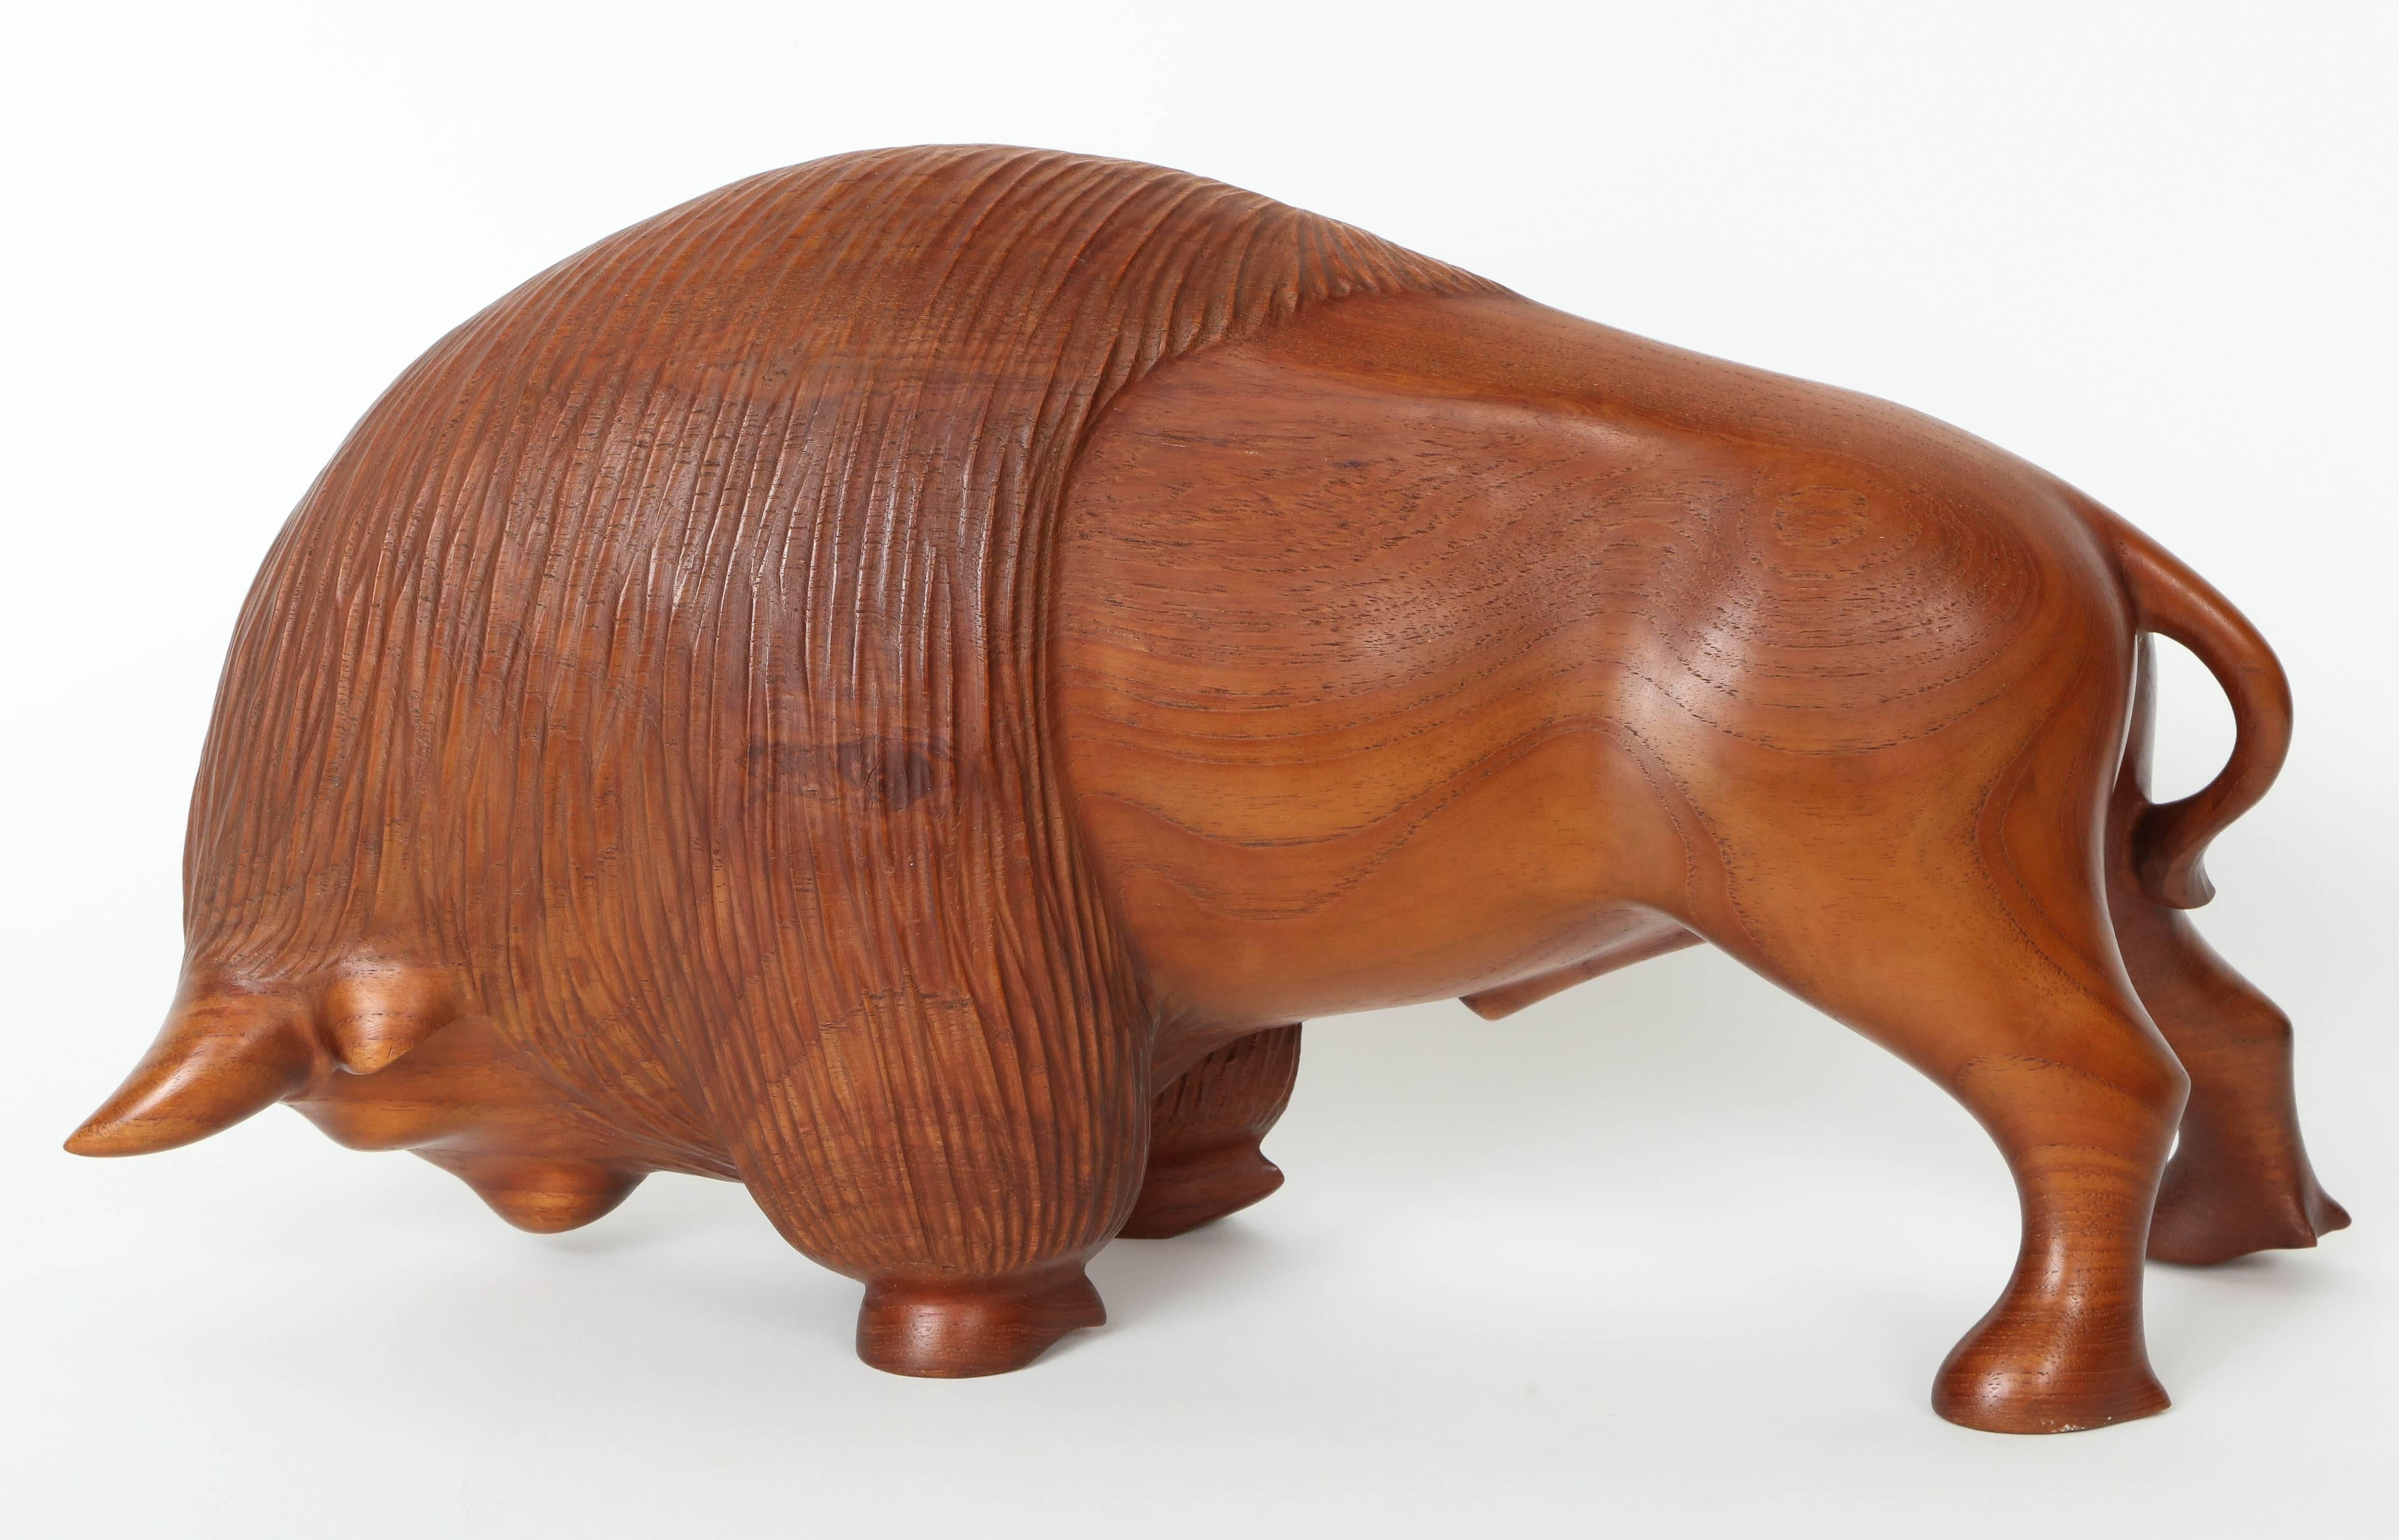 A Danish carved teakwood bison, circa 1953.
Originally purchased from Den Permanente in 1953, Copenhagen as a gift to the former owner for service in the Copenhagen Commune. 

Den Permanente was a Co-operative institution for the exhibition of